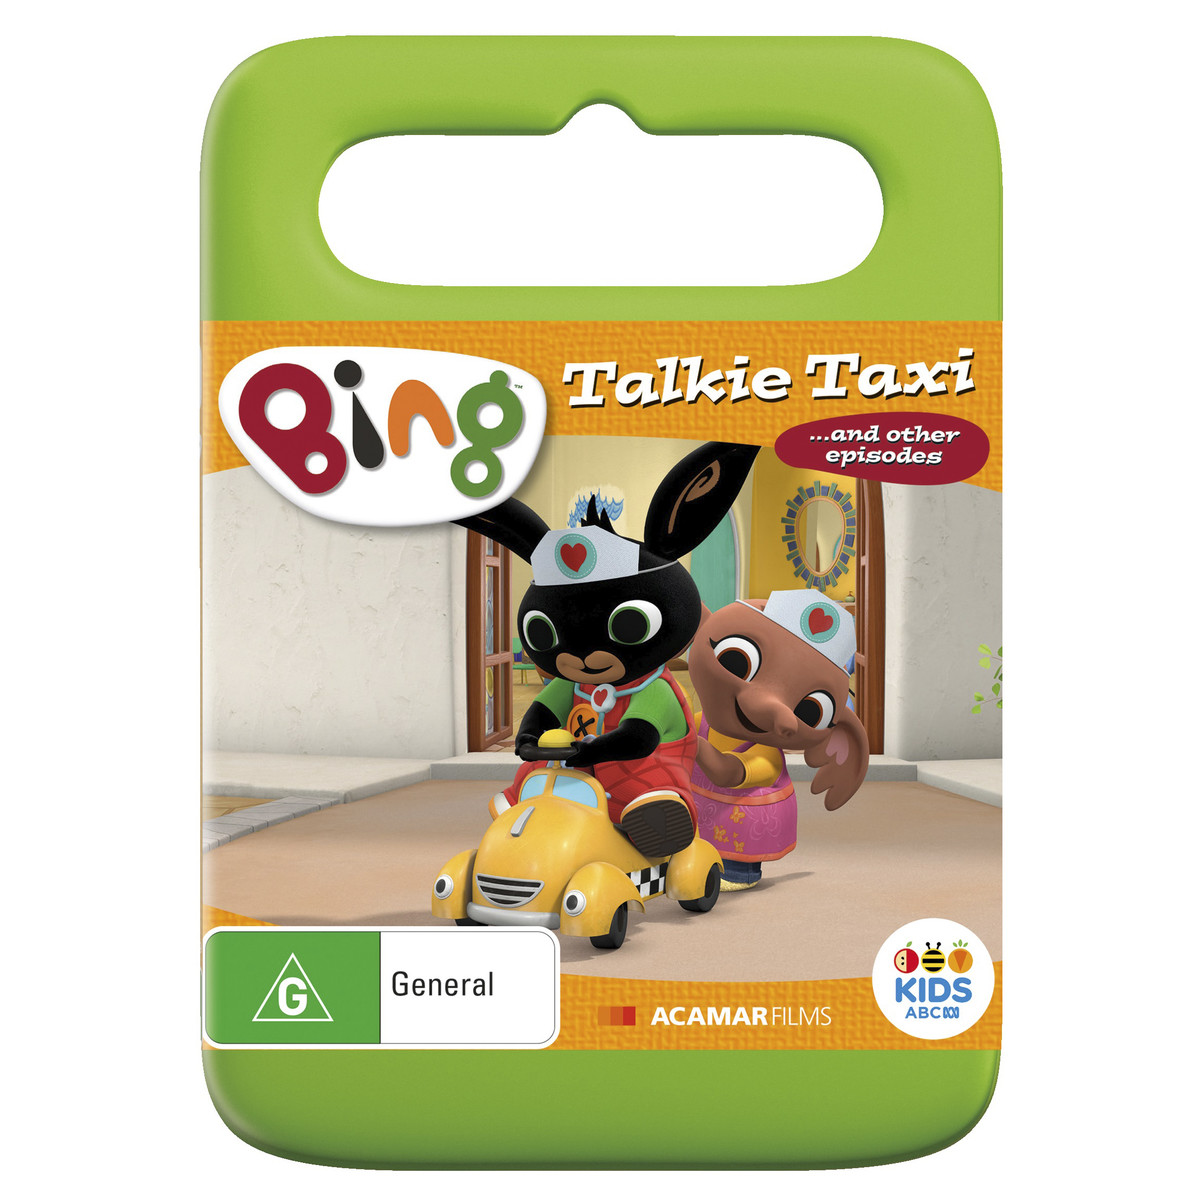 Bing Talkie Taxi and Other Episodes - DVD